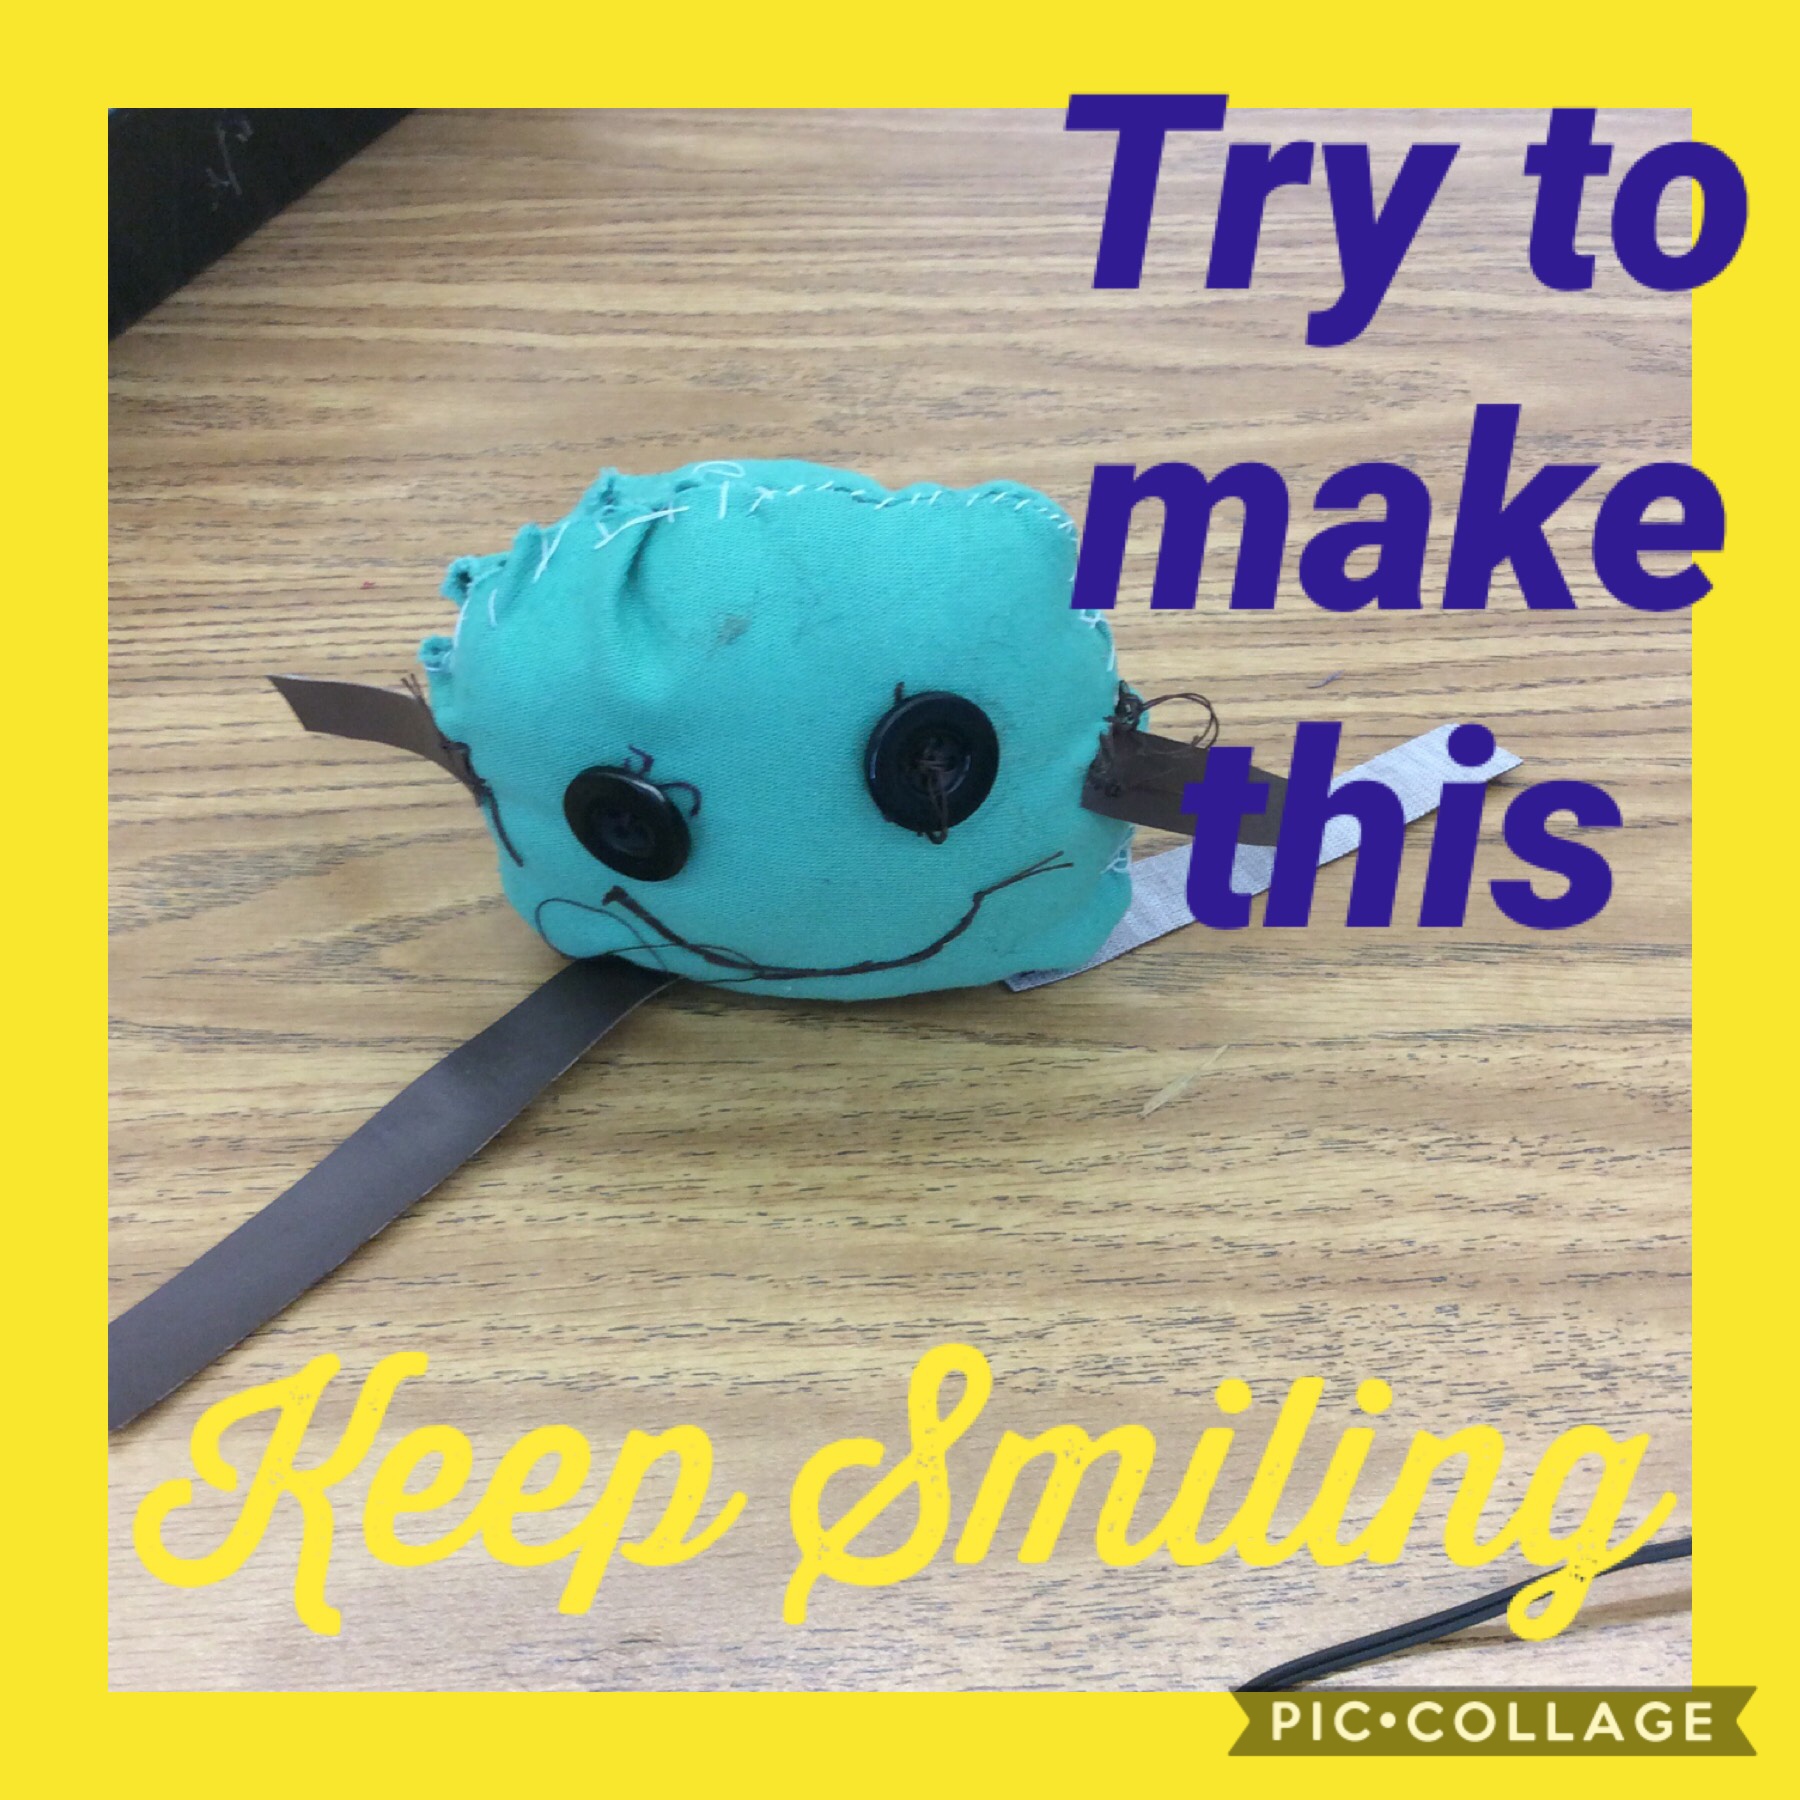  Comment below if you can sew your own creaton